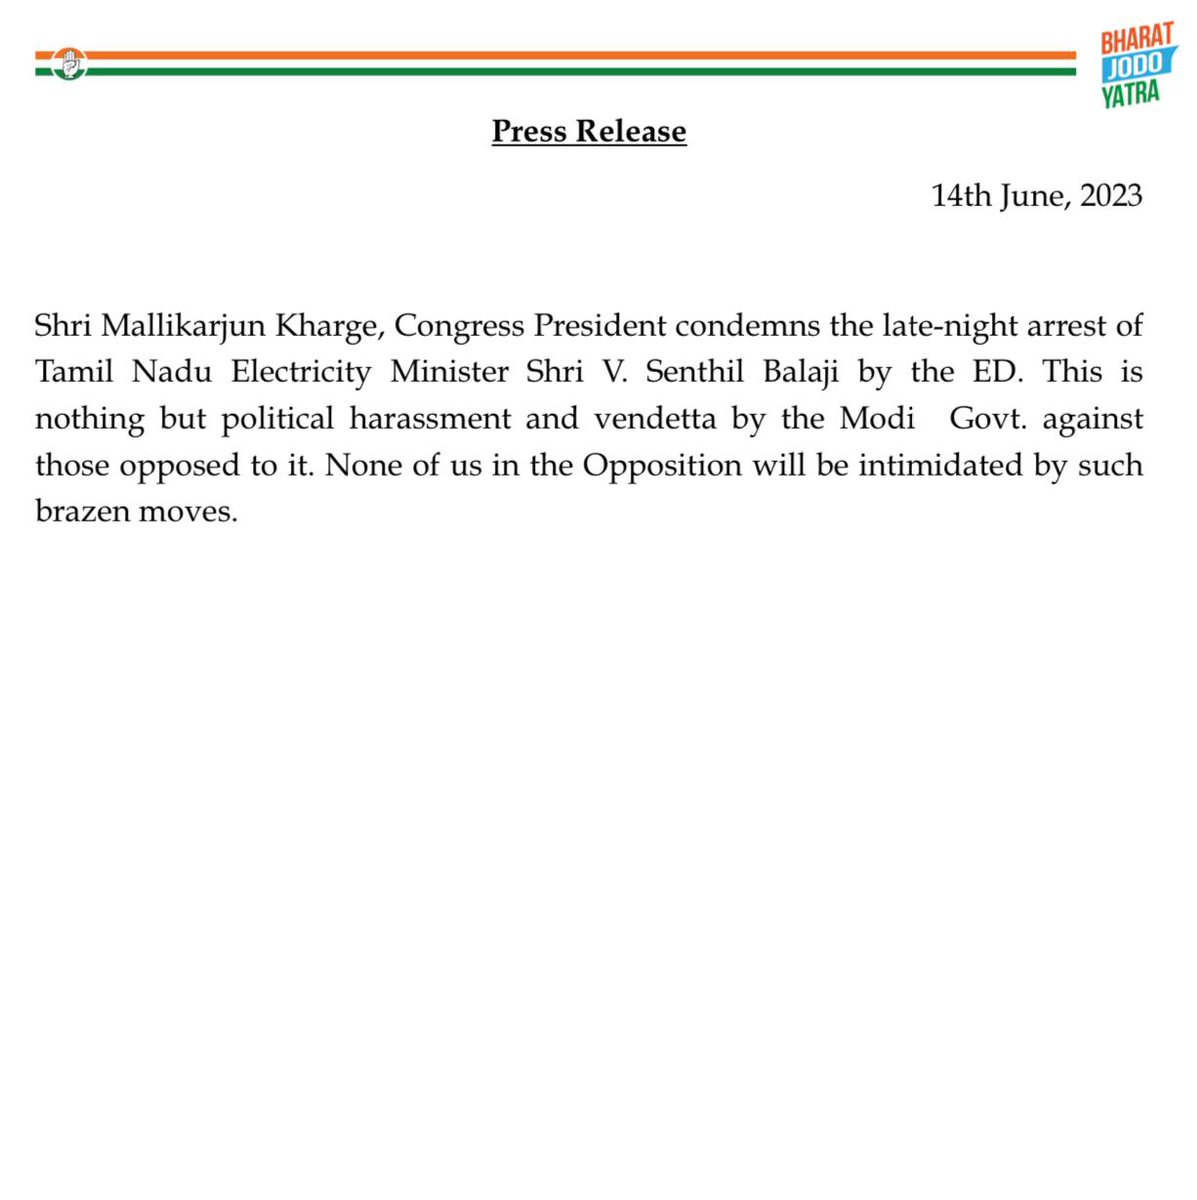 Congress President Shri @kharge condemns the late-night arrest of Tamil Nadu Electricity Minister Shri V. Senthil Balaji by the ED.

This is nothing but political harassment and vendetta by the Modi govt. against those opposed to it. None of us in the Opposition will be…